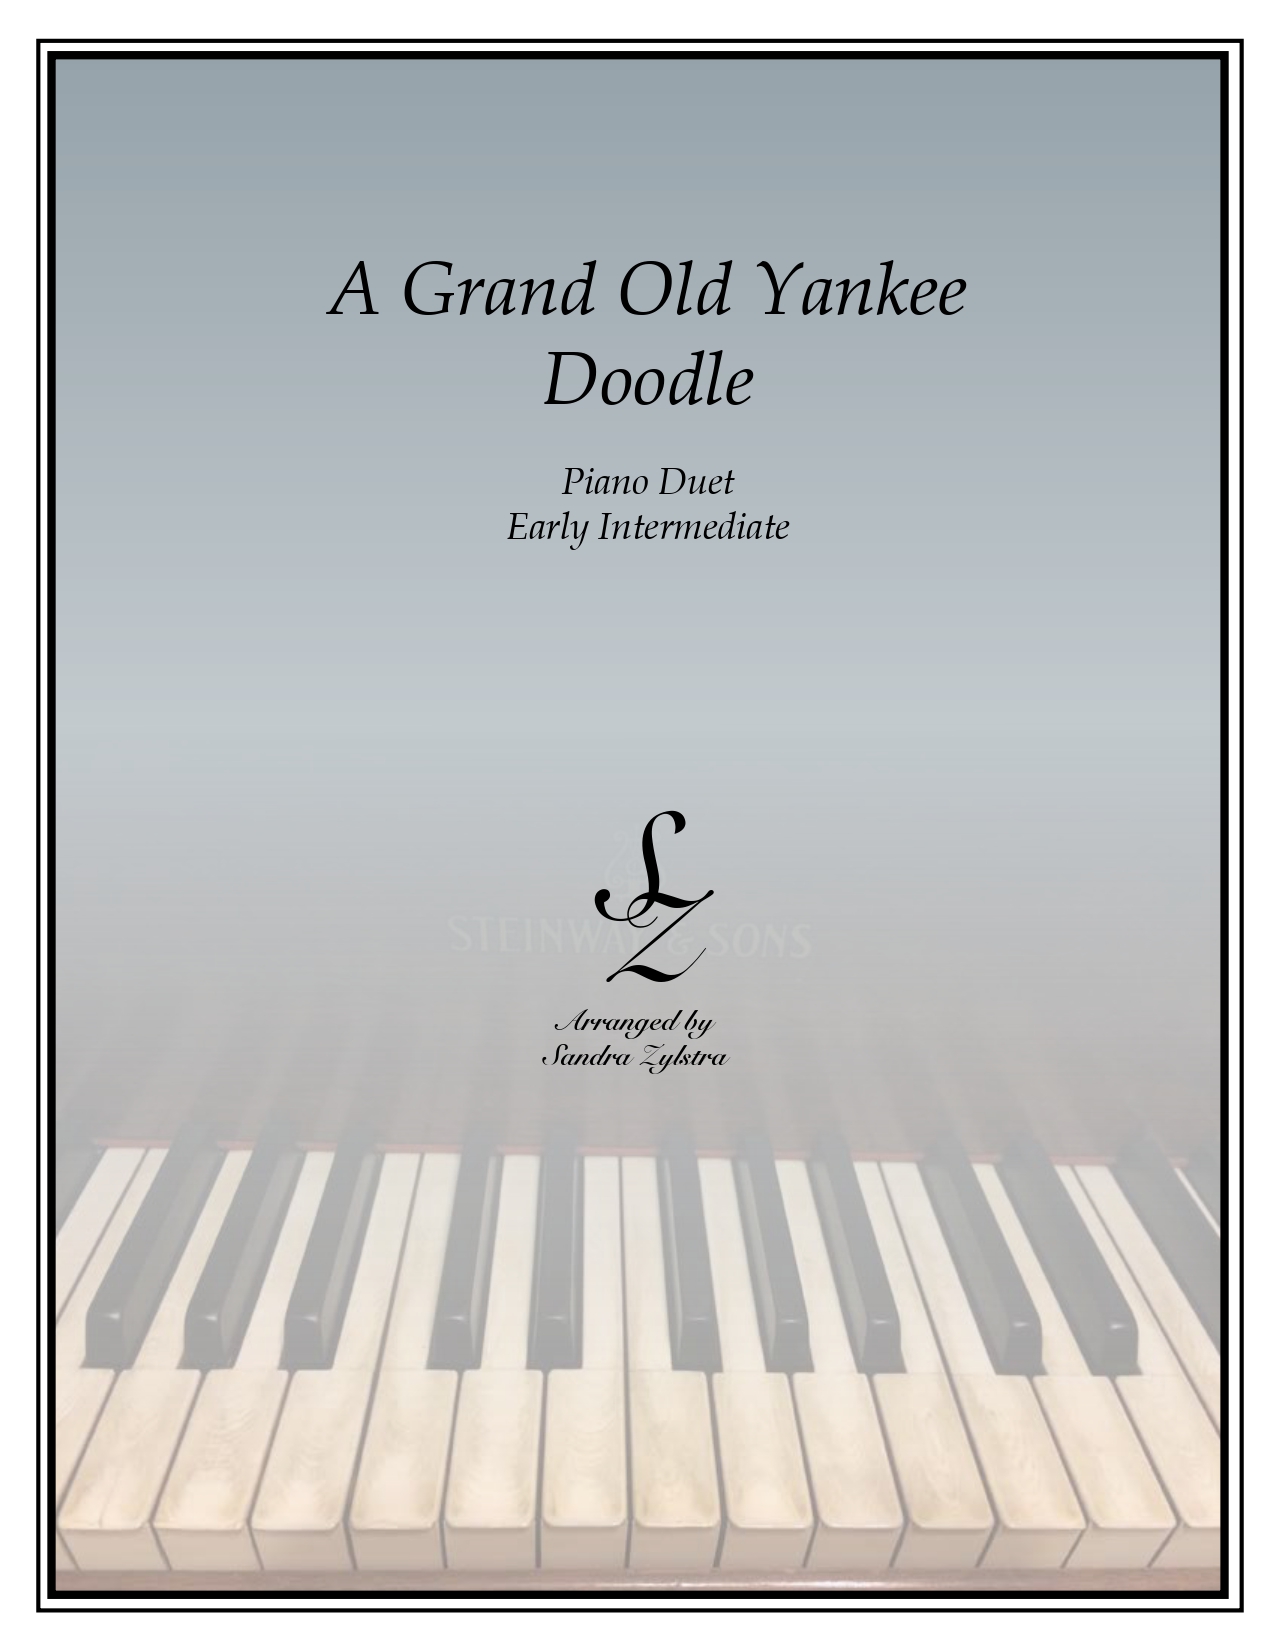 A Grand Old Yankee Doodle early intermediate duet parts cover page 00011